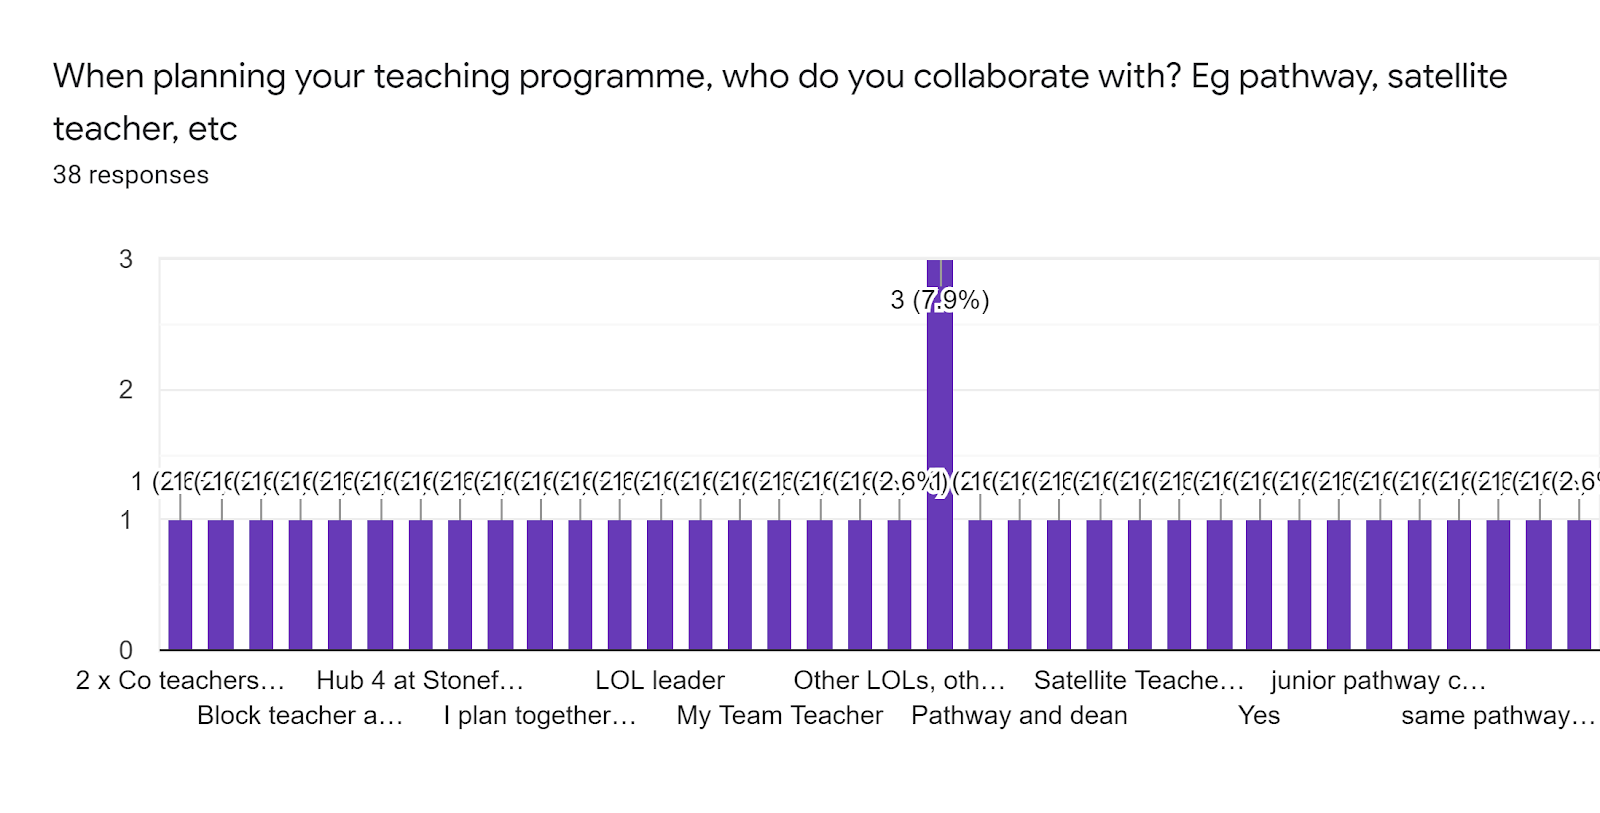 Forms response chart. Question title: When planning your teaching programme, who do you collaborate with? Eg pathway, satellite teacher, etc. Number of responses: 38 responses.